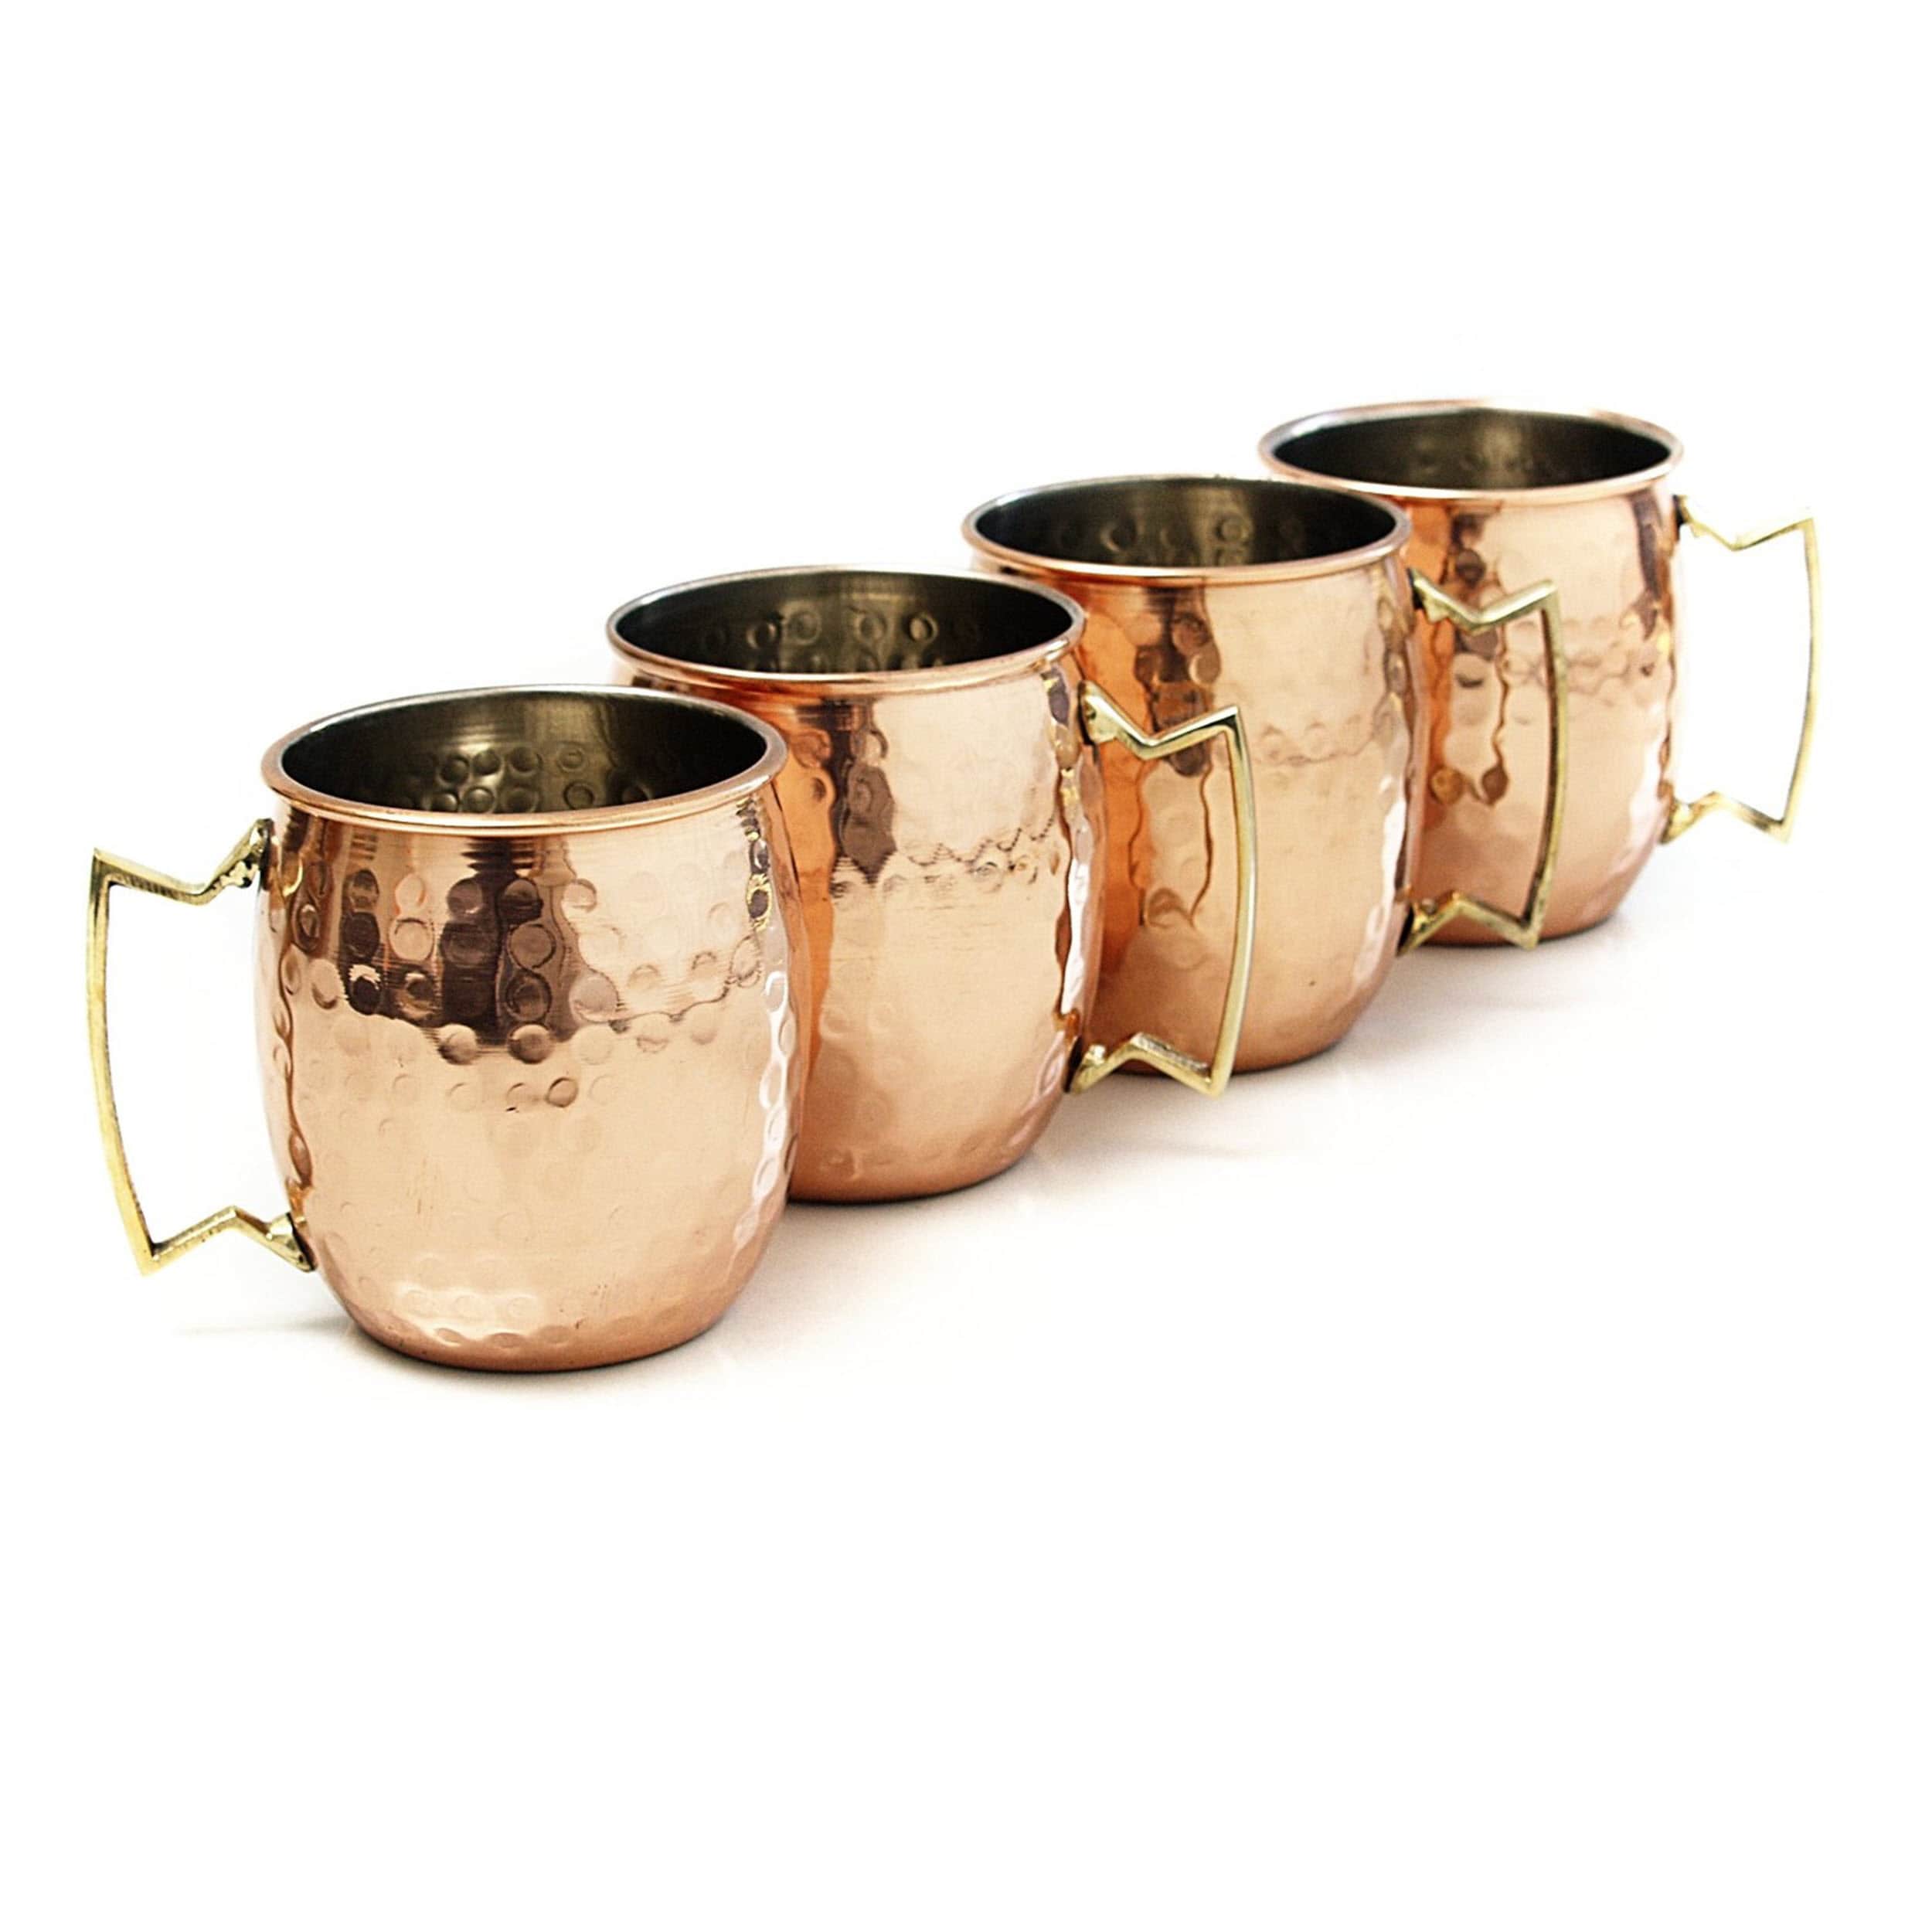 16oz Authentic Moscow Mule Mugs 1 Solid Copper Moscow Mule Mug 